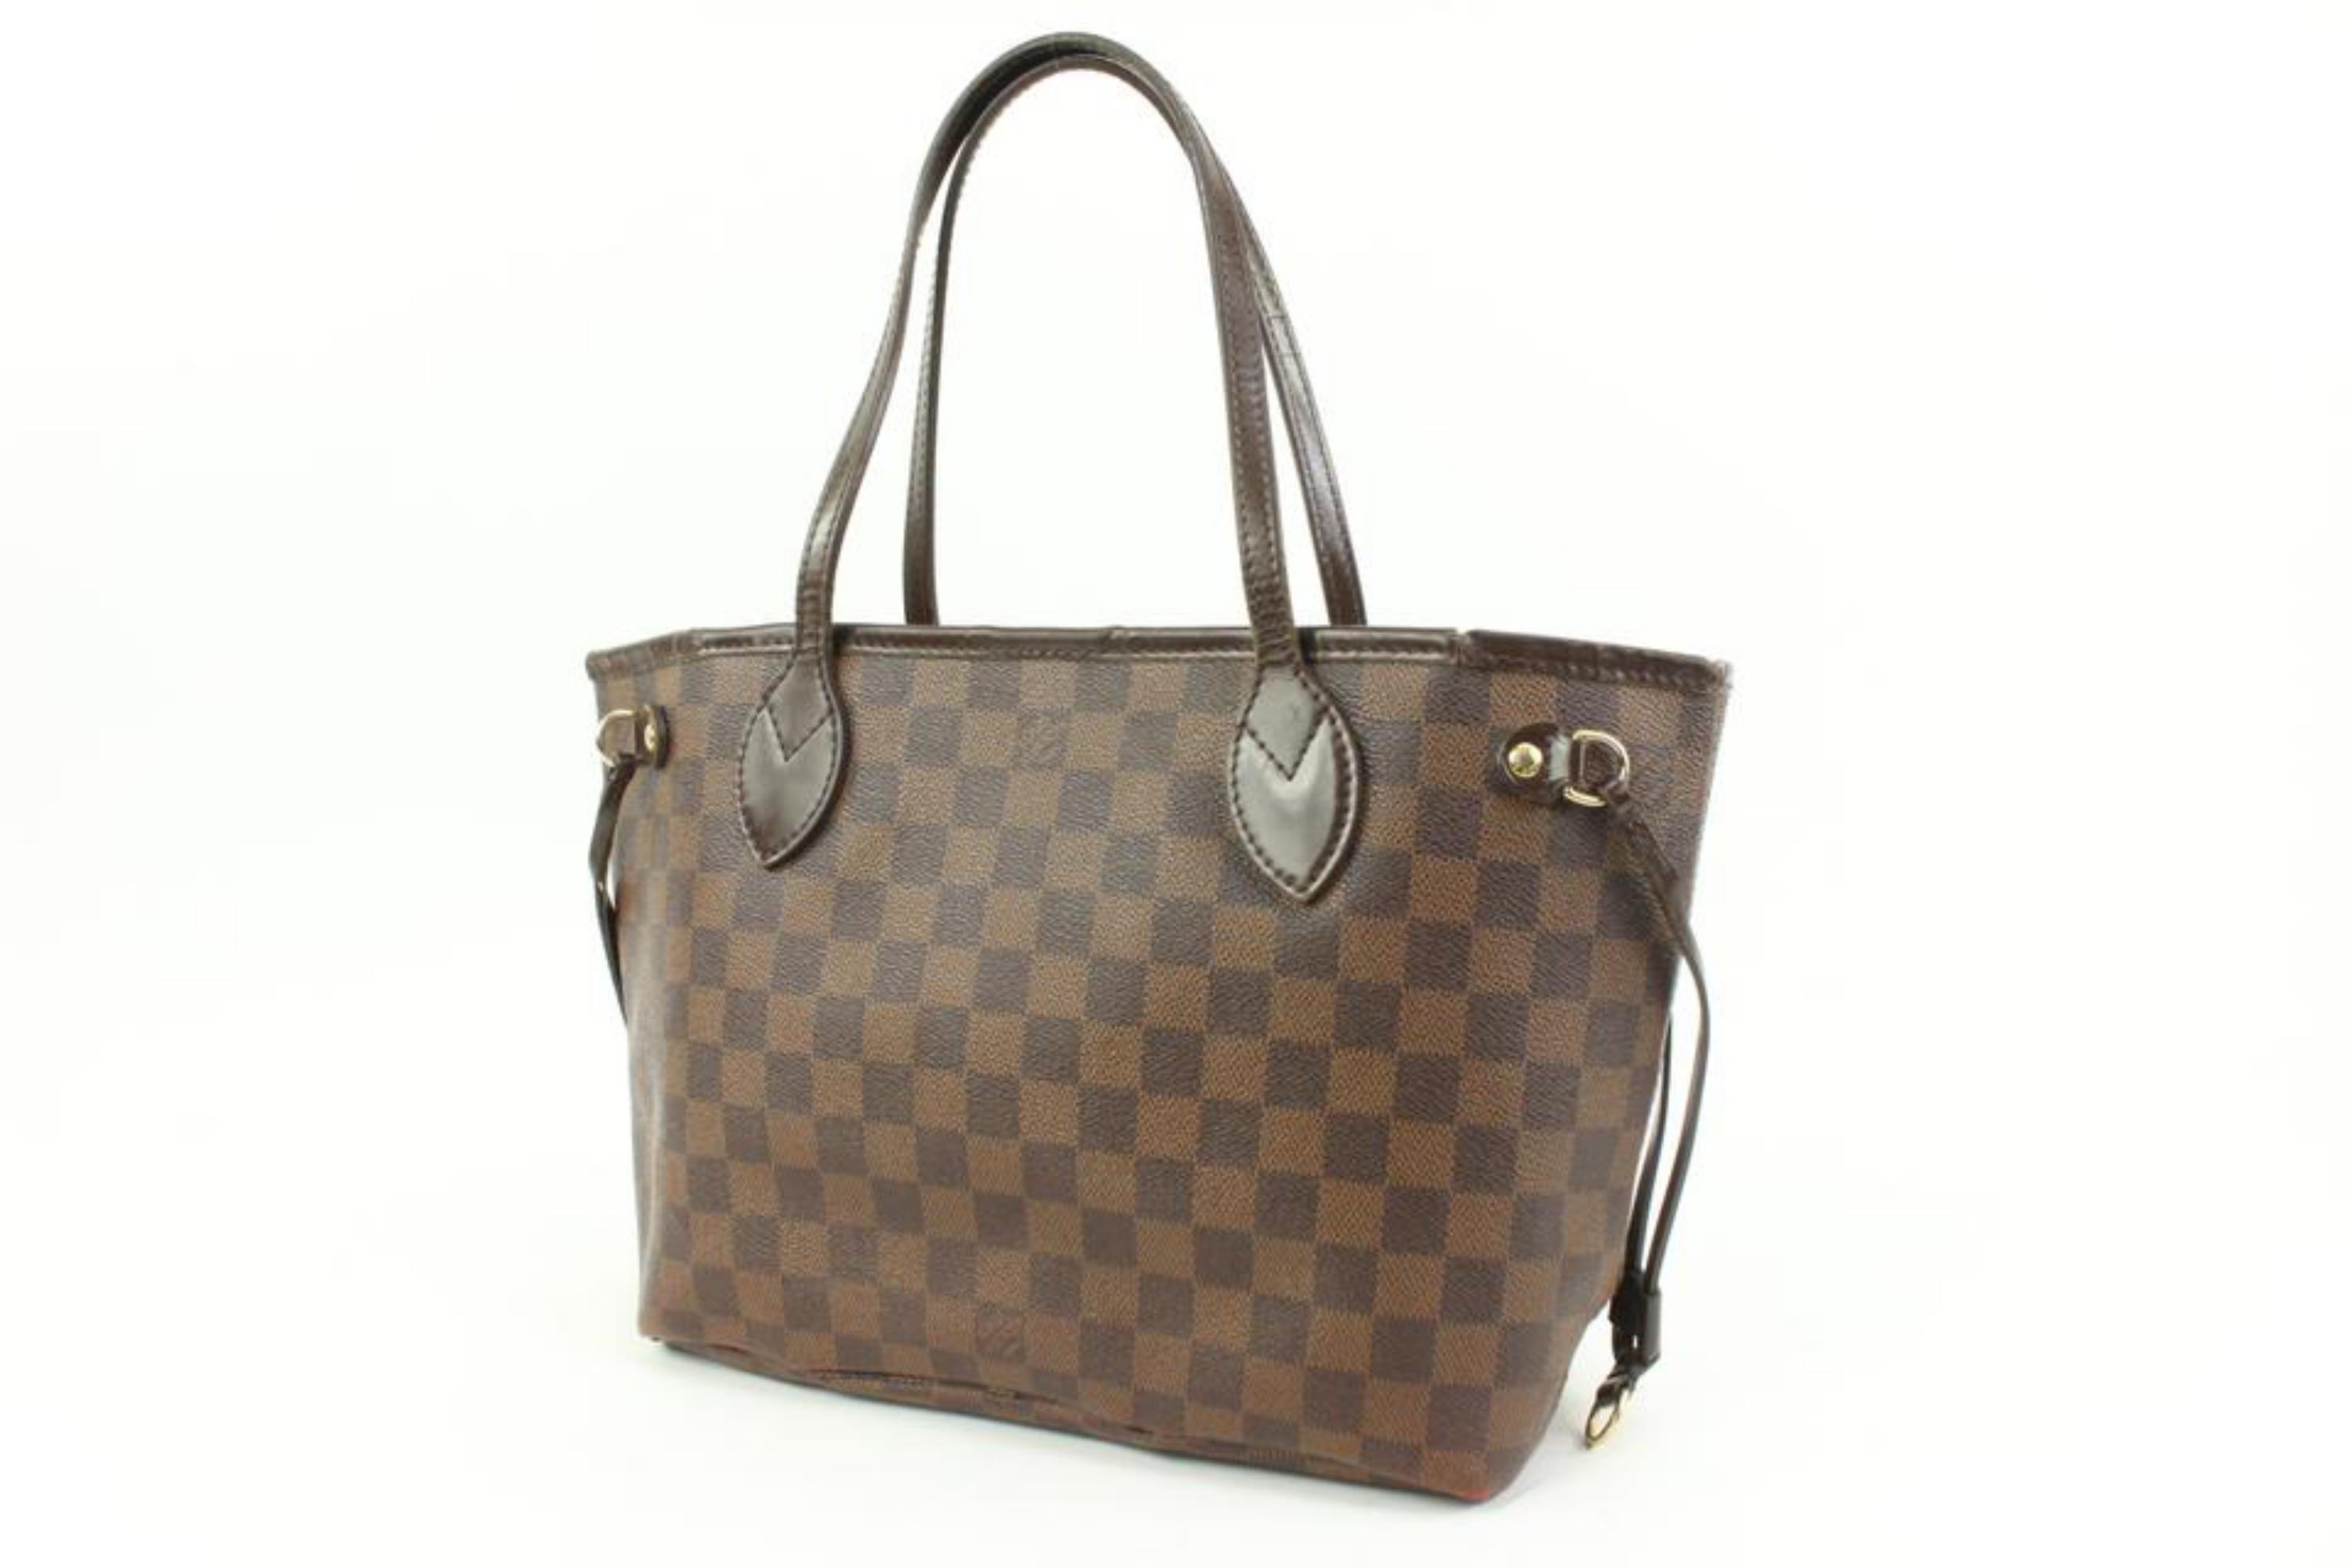 Louis Vuitton Small Damier Ebene Neverfull PM Tote Bag 70lv315s
Date Code/Serial Number: VI0191
Made In: France
Measurements: Length:  14.5